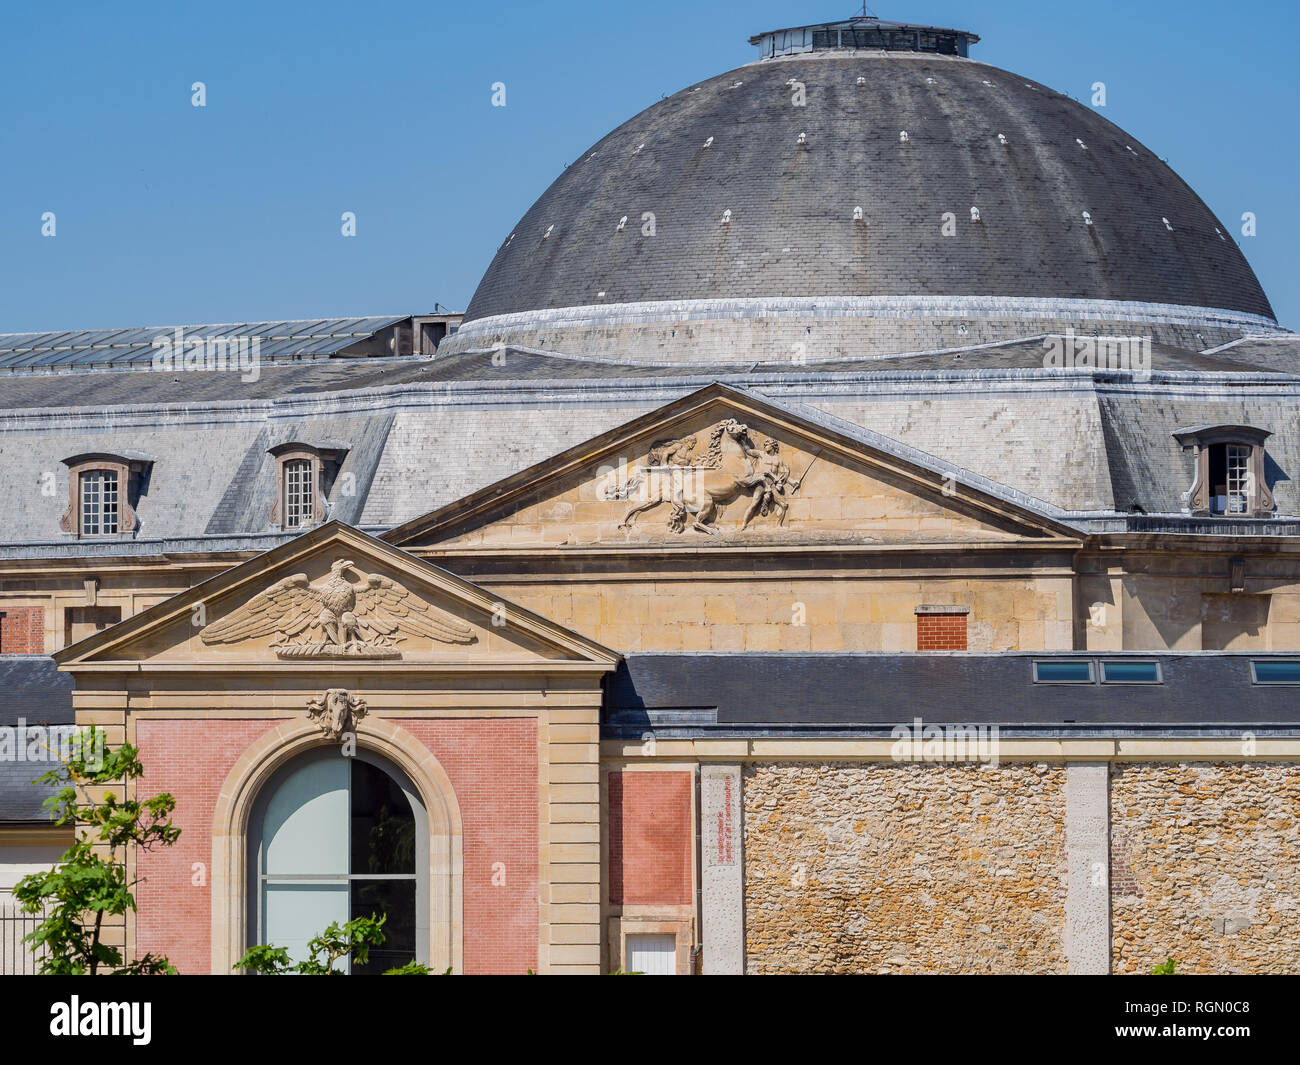 Exterior view of the Sculptures and Mouldings Gallery at Versailles, France Stock Photo